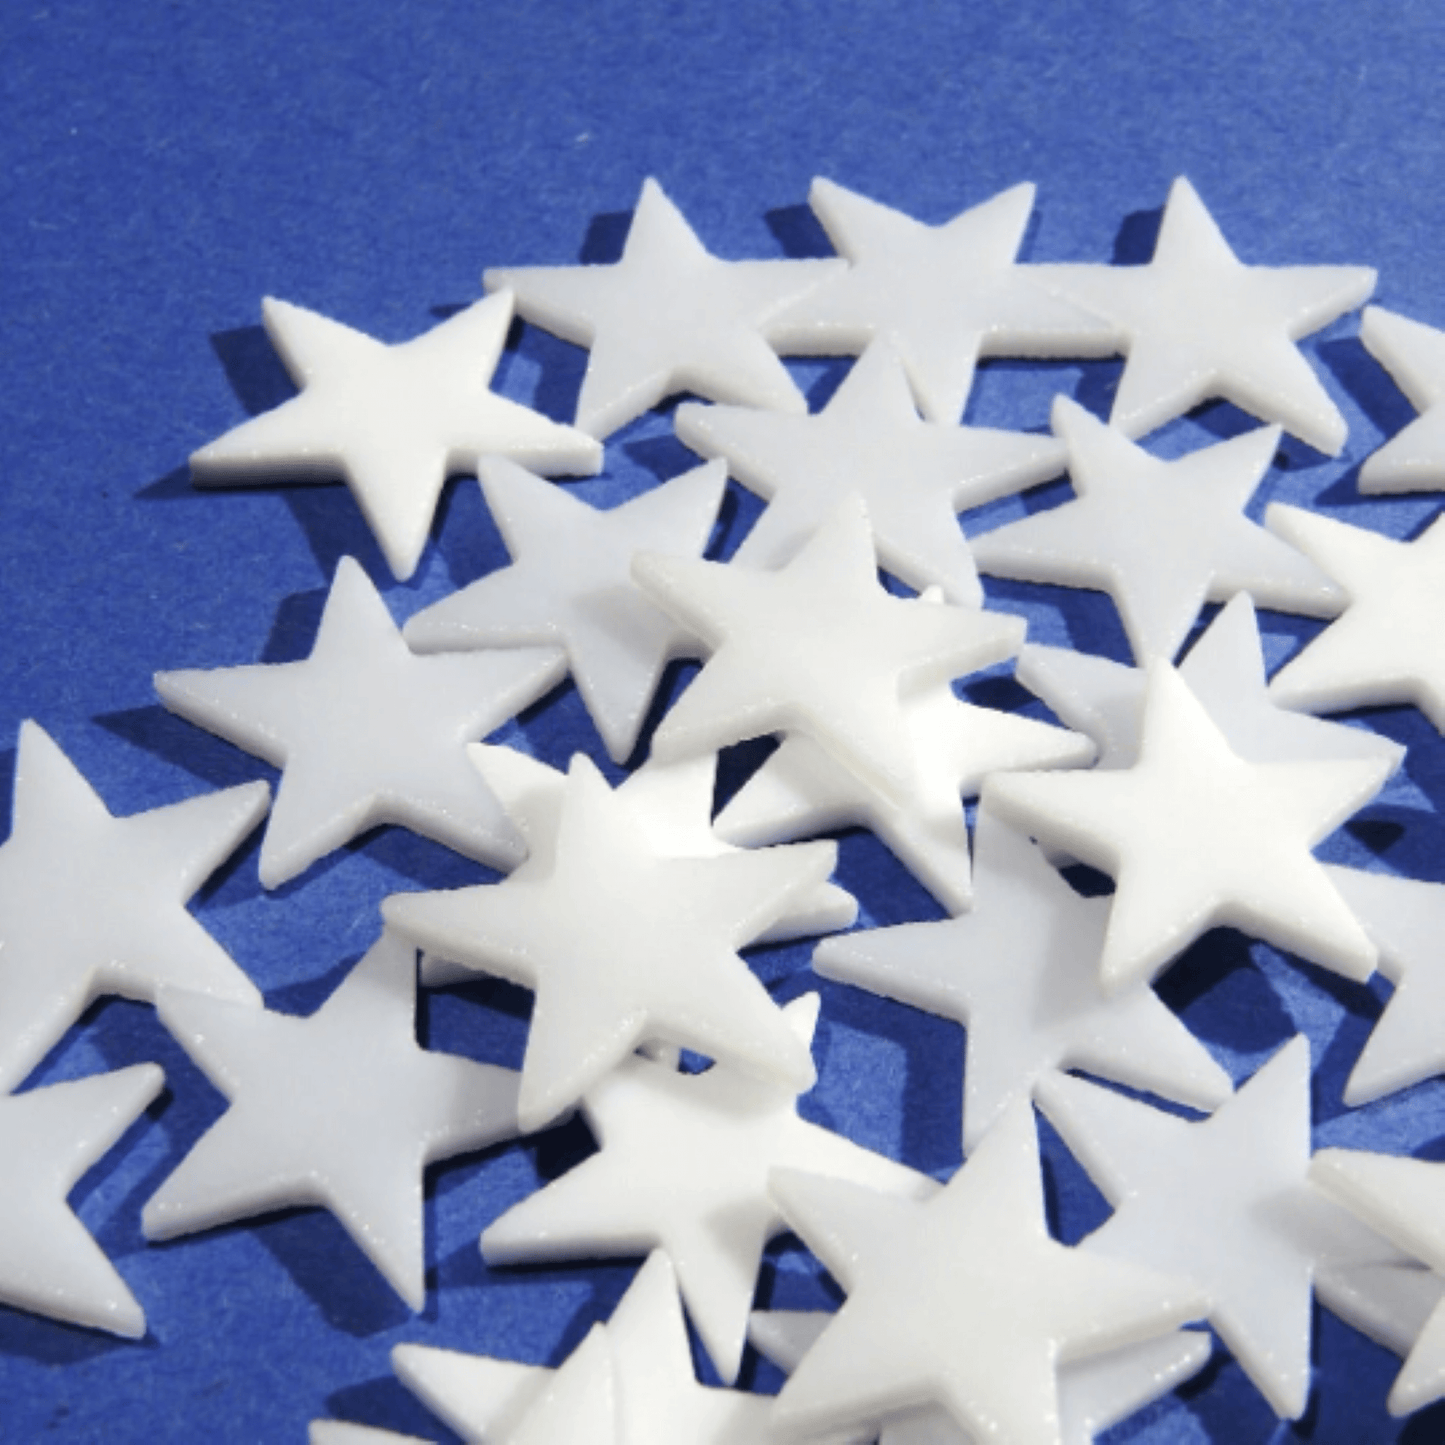 Precut Stained Glass Stars, 1.5" White Glass Stars 96 COE for Fusing, Mosaics, Jewelry, Stained Glass